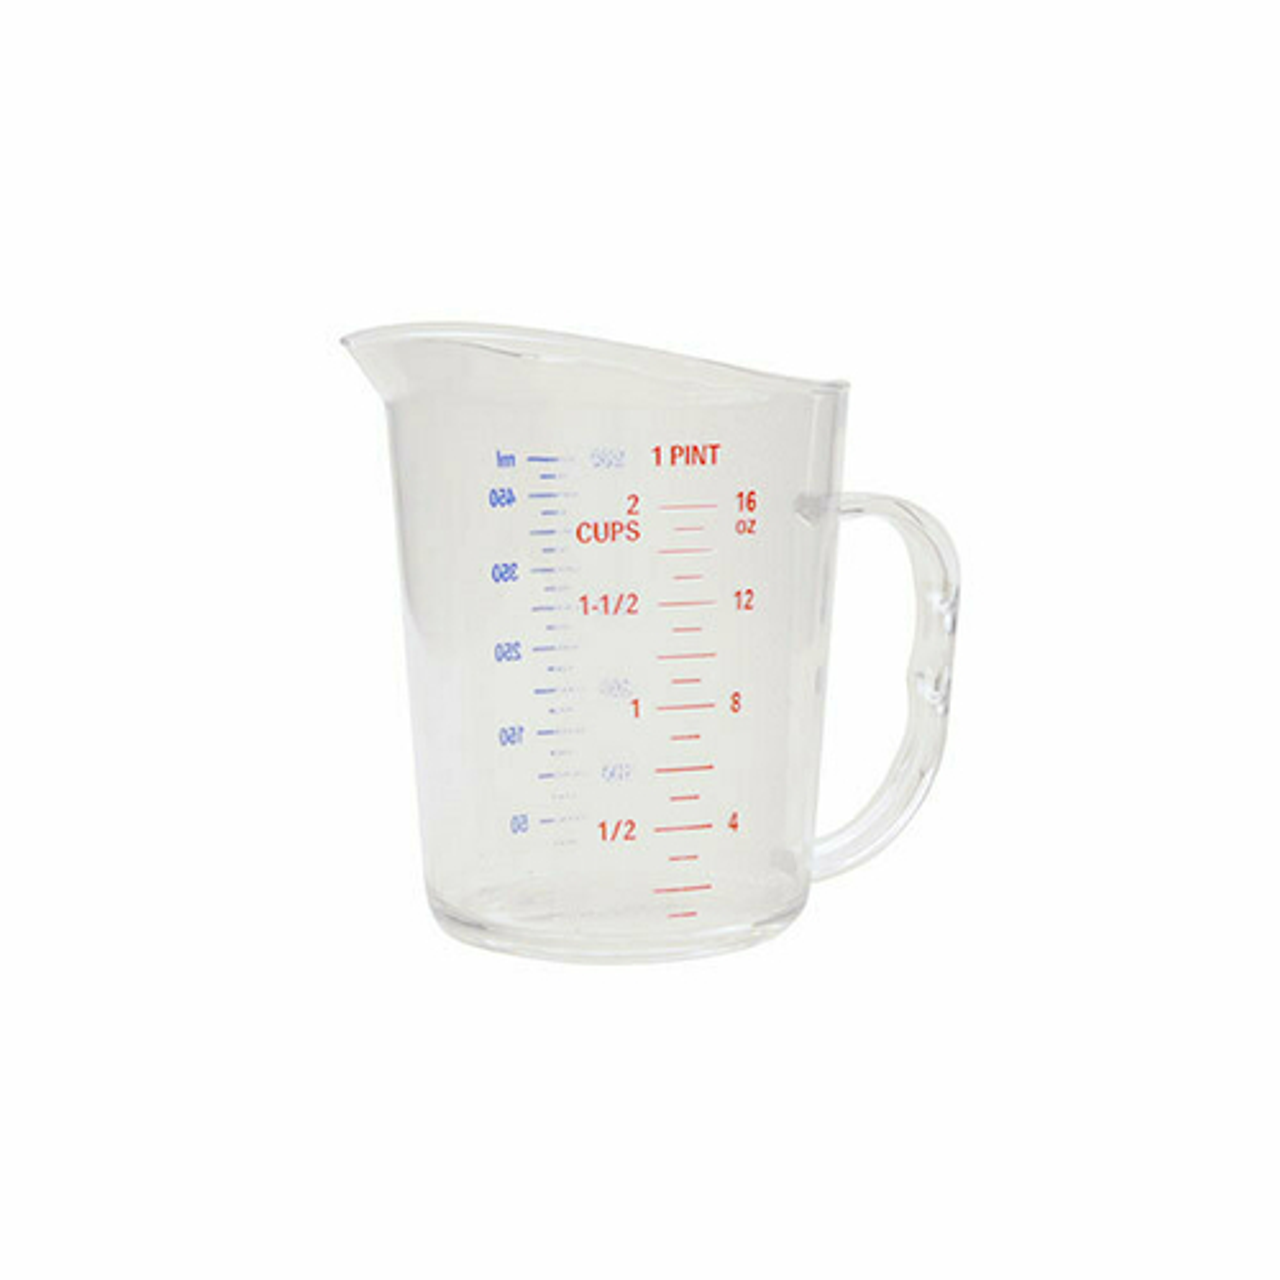 https://cdn11.bigcommerce.com/s-g3i86bef61/images/stencil/1280x1280/products/3211/2046/Thunder-PLMD016CL-Measuring-Cup-1pt-Plastic__71405.1663700733.png?c=1